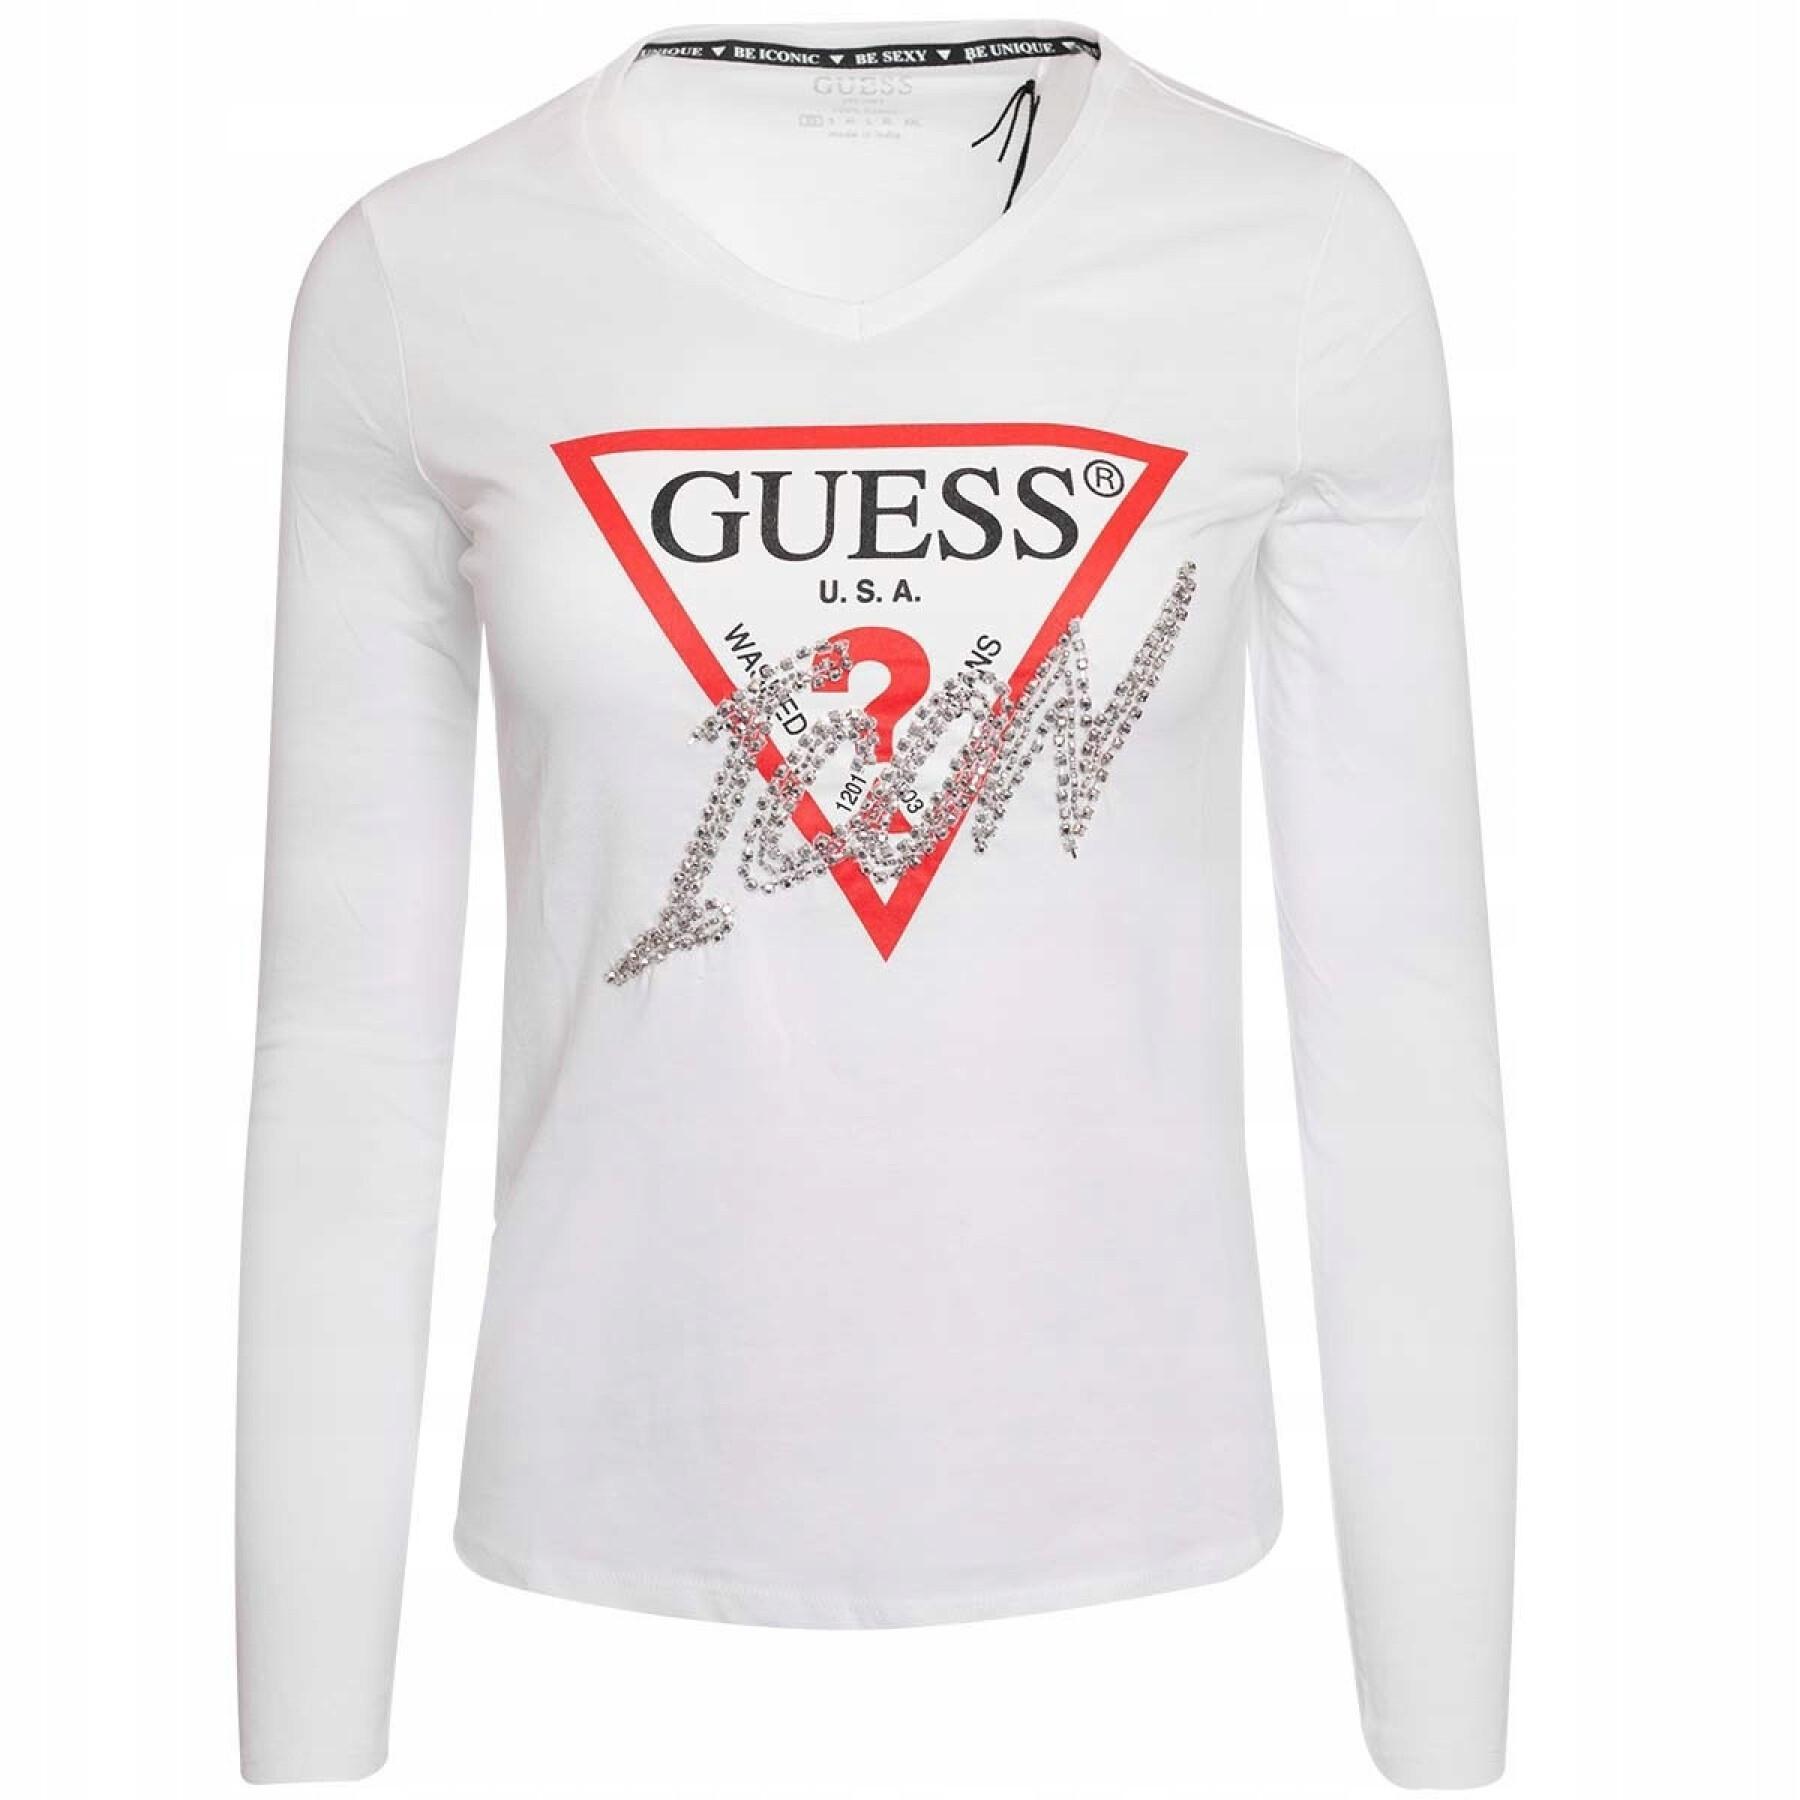 T-shirt col V manches longues femme Guess Icon